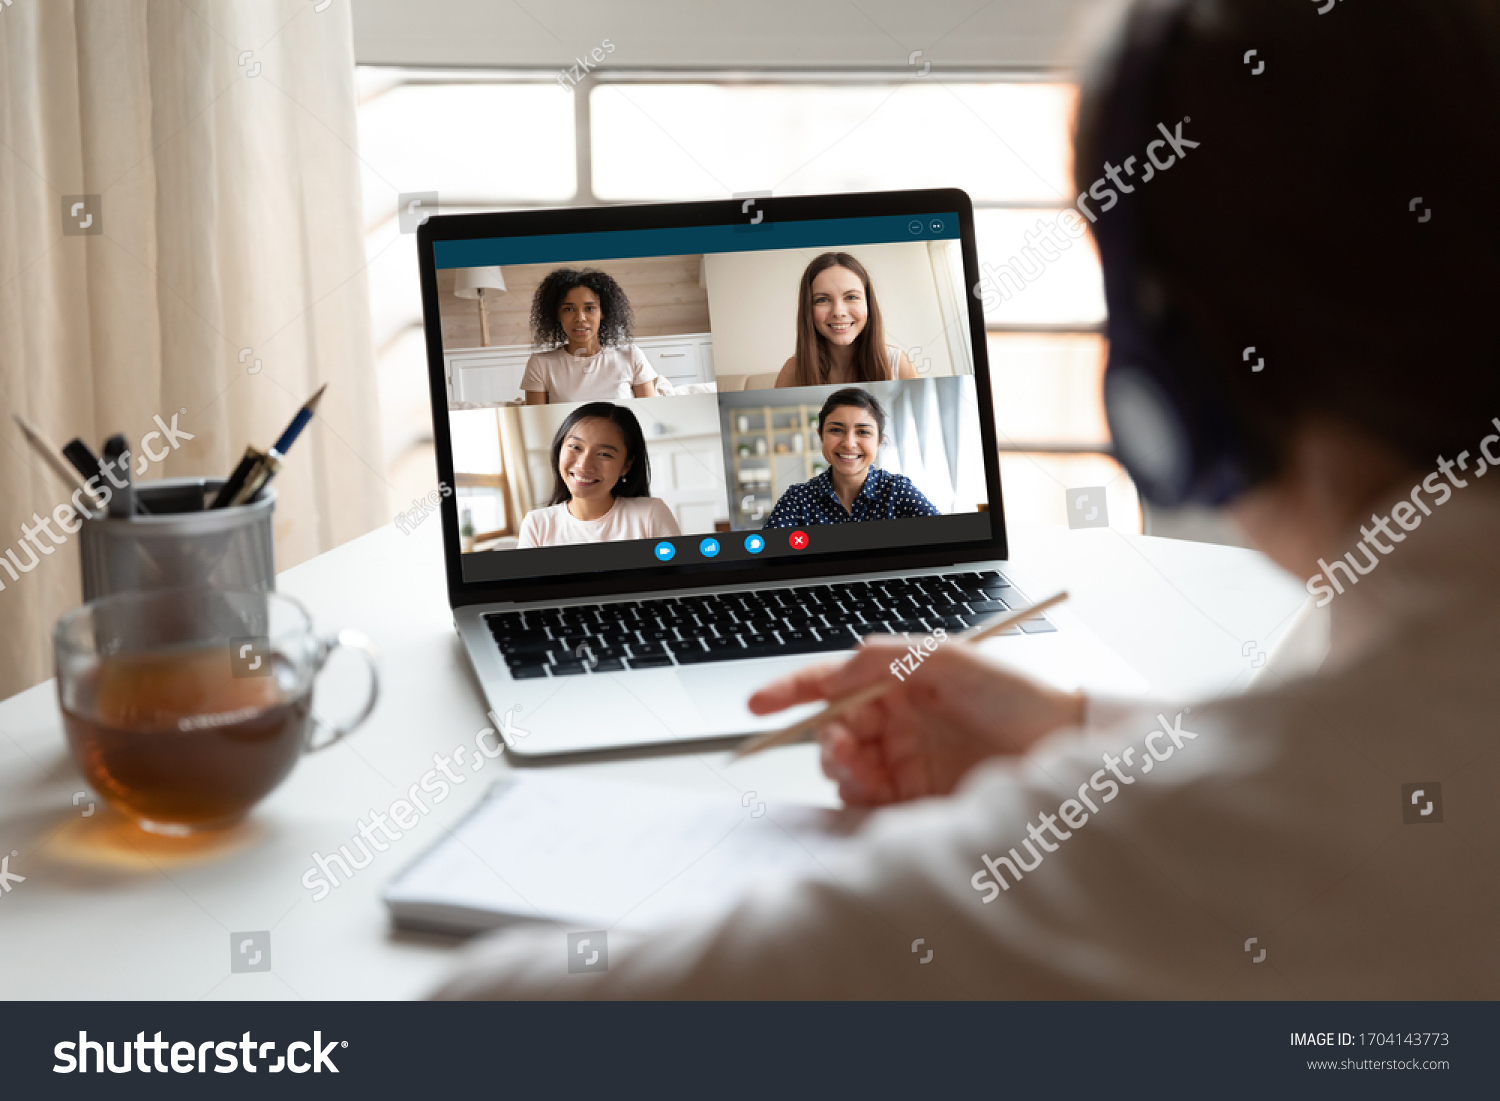 Woman sitting at desk noting writing information studying at home with multiracial students diverse ladies makes video call using video conference application, view over girl shoulder to laptop screen #1704143773